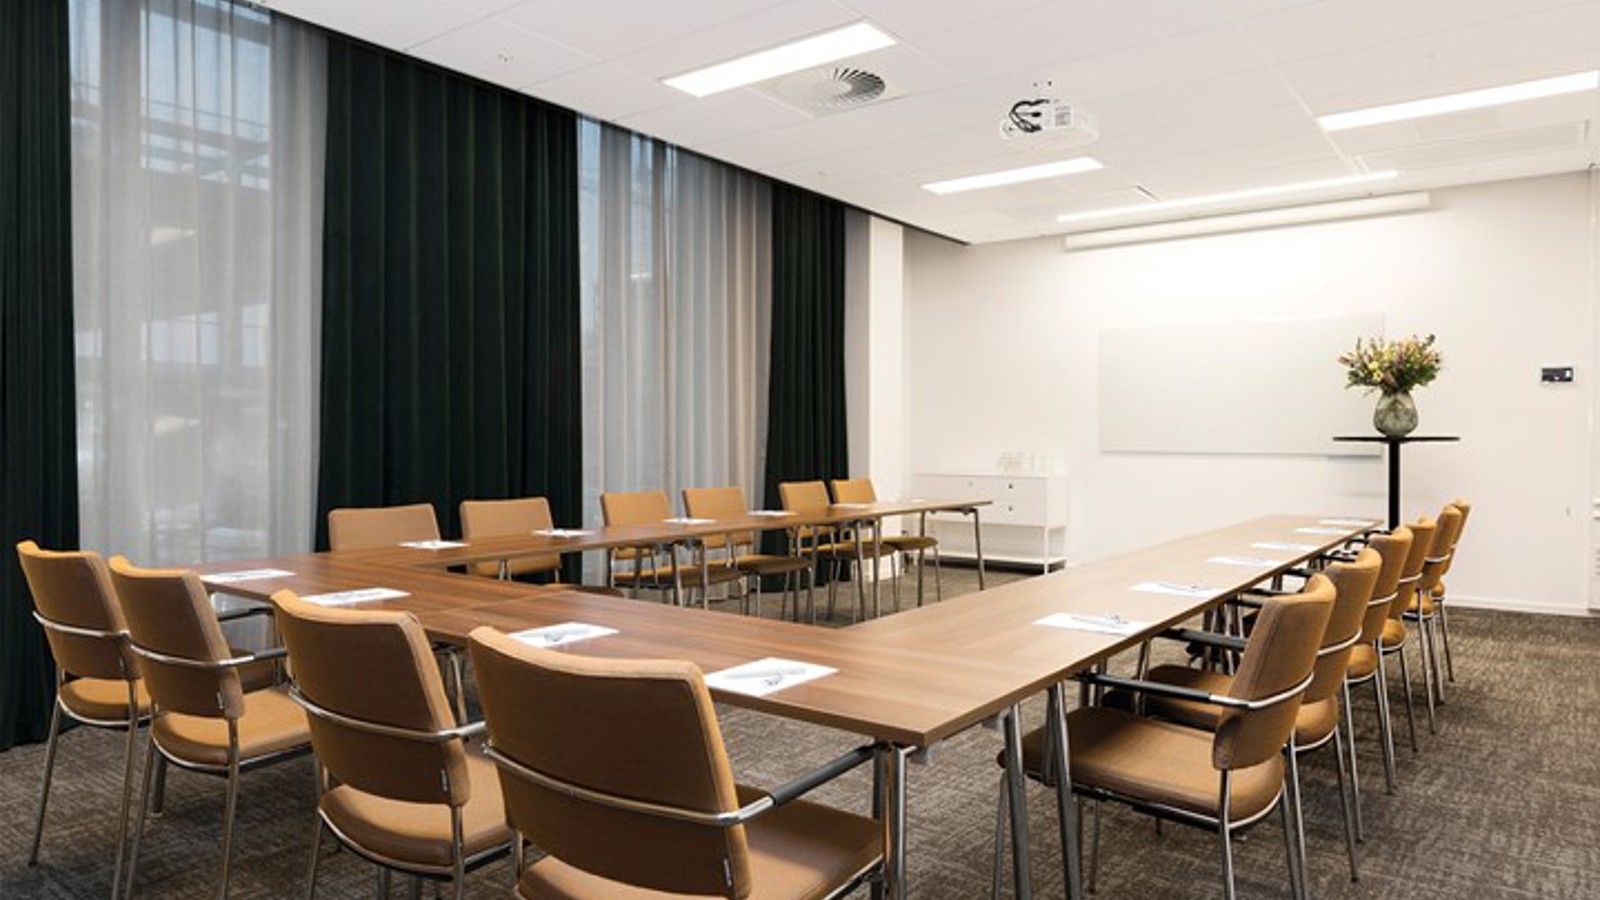 Conference room with u-shaped seating, brown furniture, white walls, gray carpet and large windows